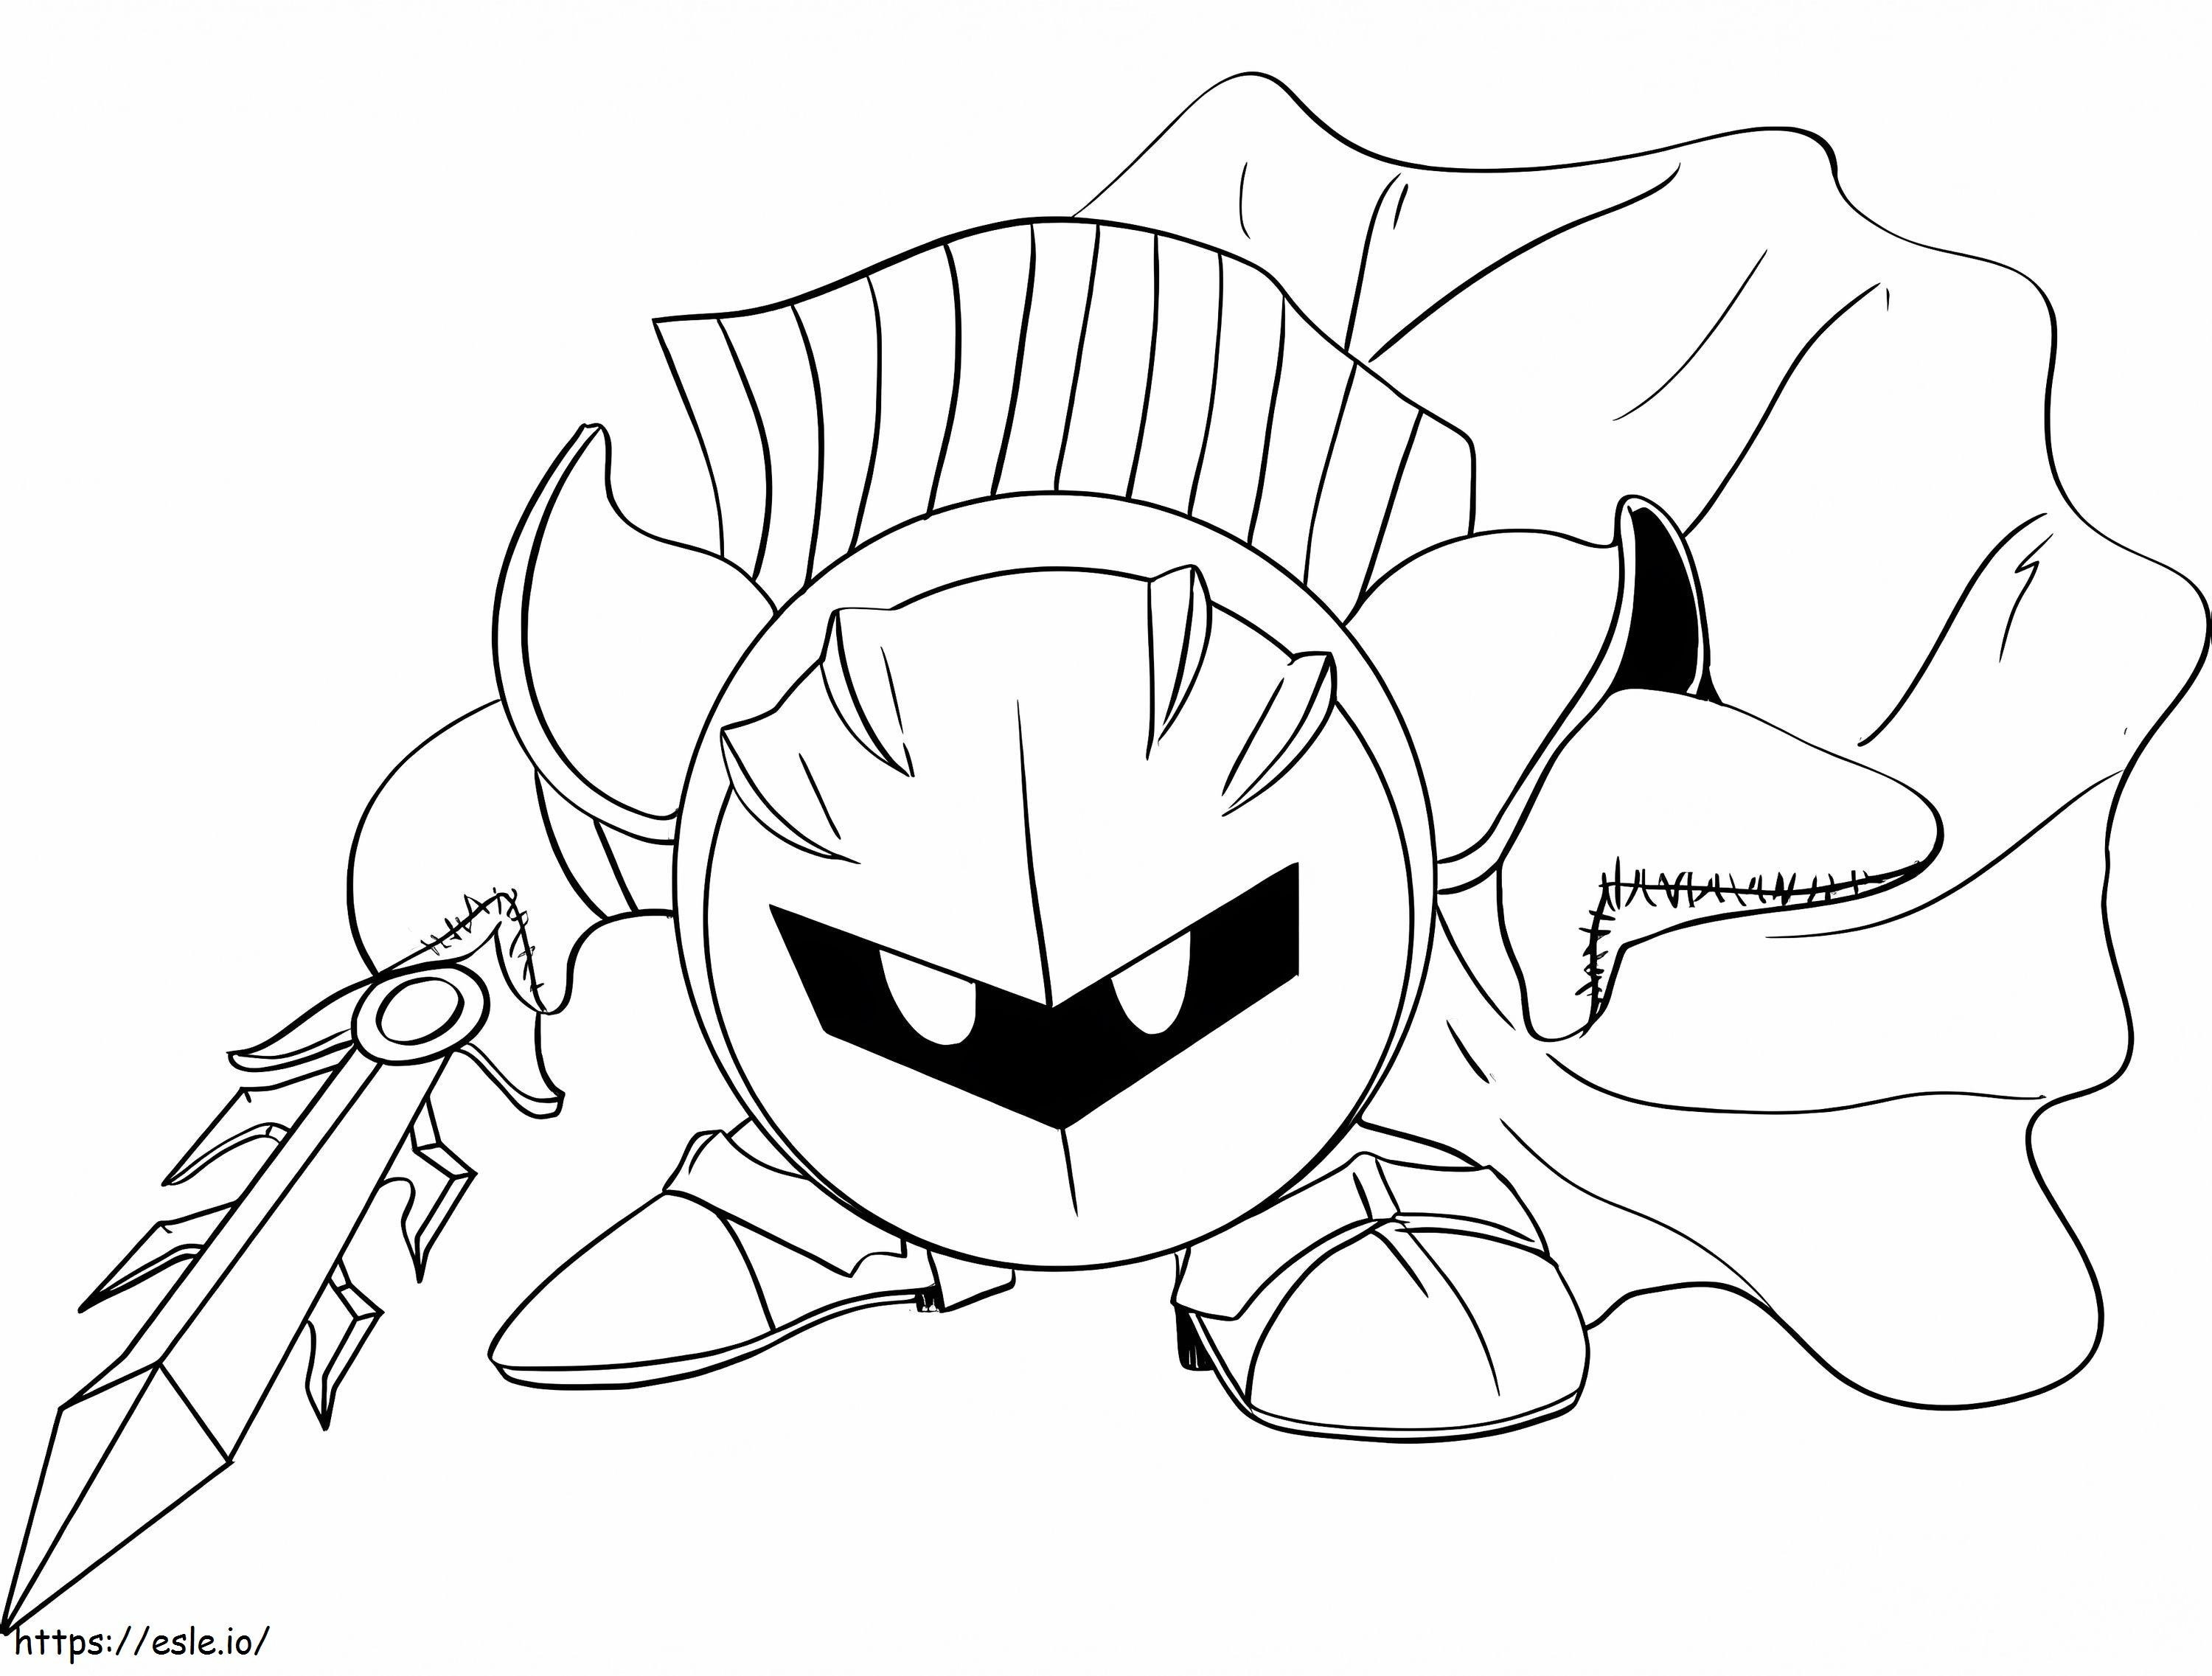 Goal Knight coloring page